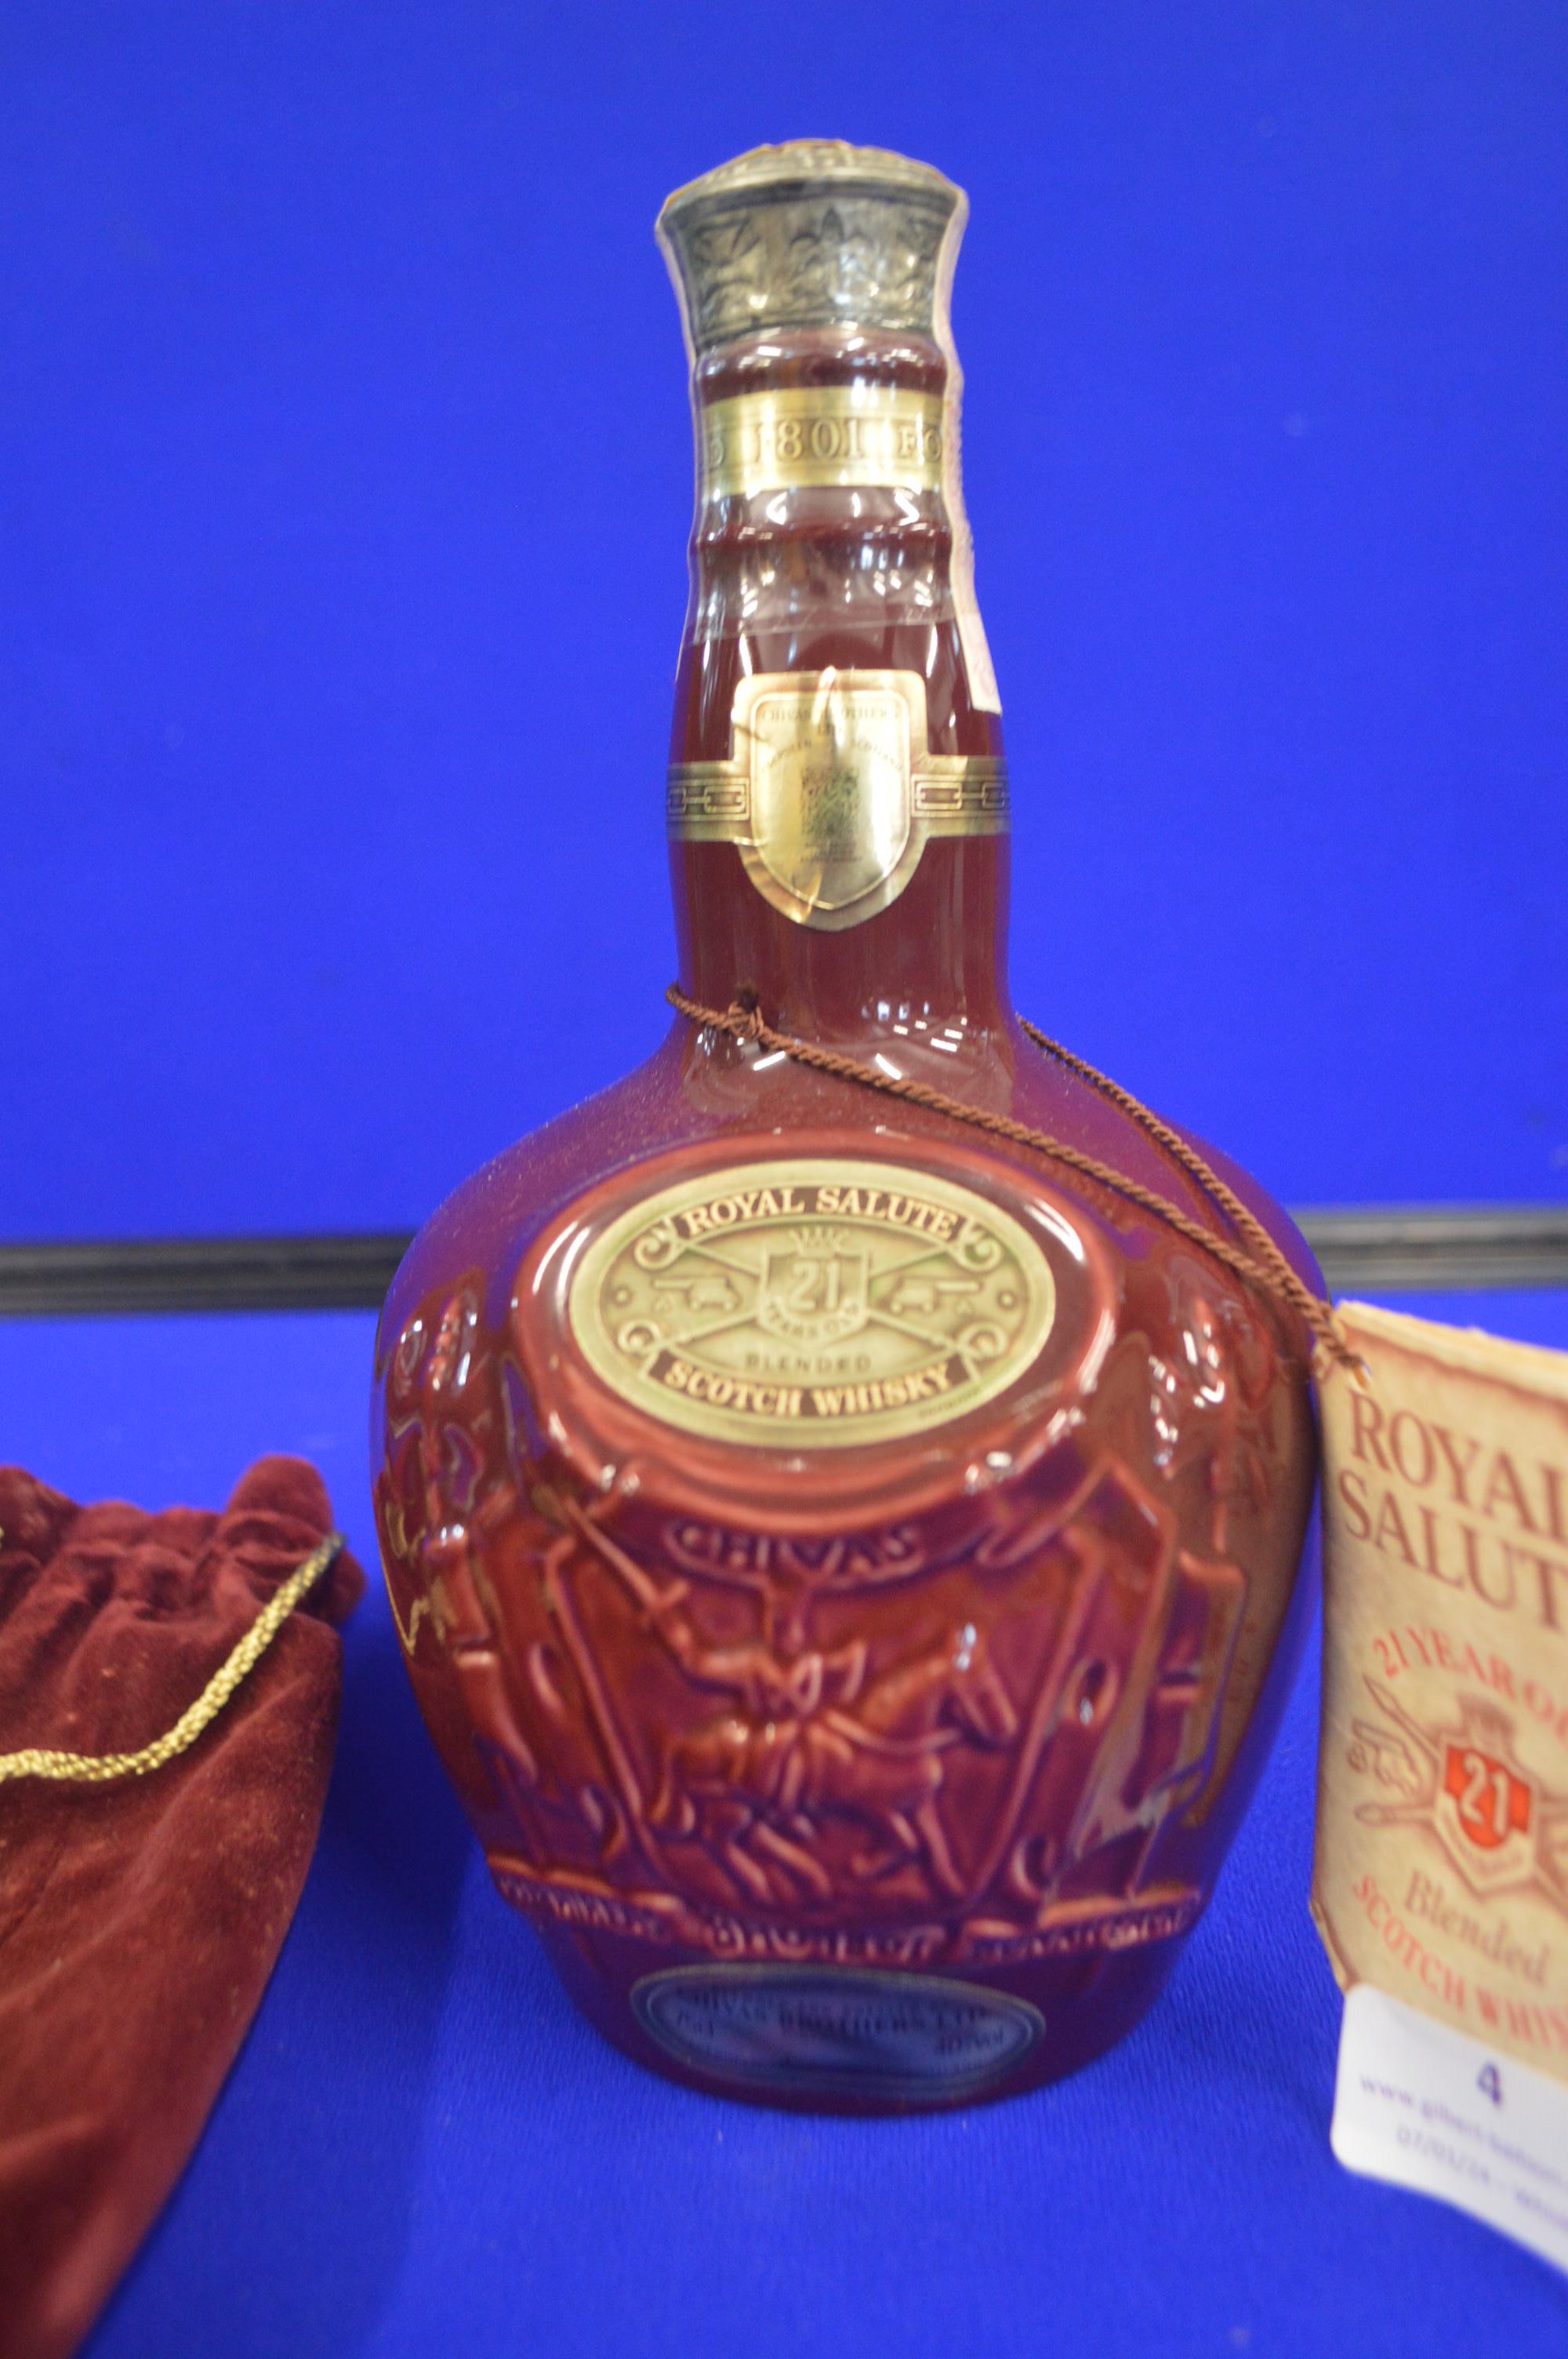 Chivas Royal Salute 21 Year Old Scotch Whisky in Wade Ceramic Presentation Flagon, and Velvet - Image 2 of 3